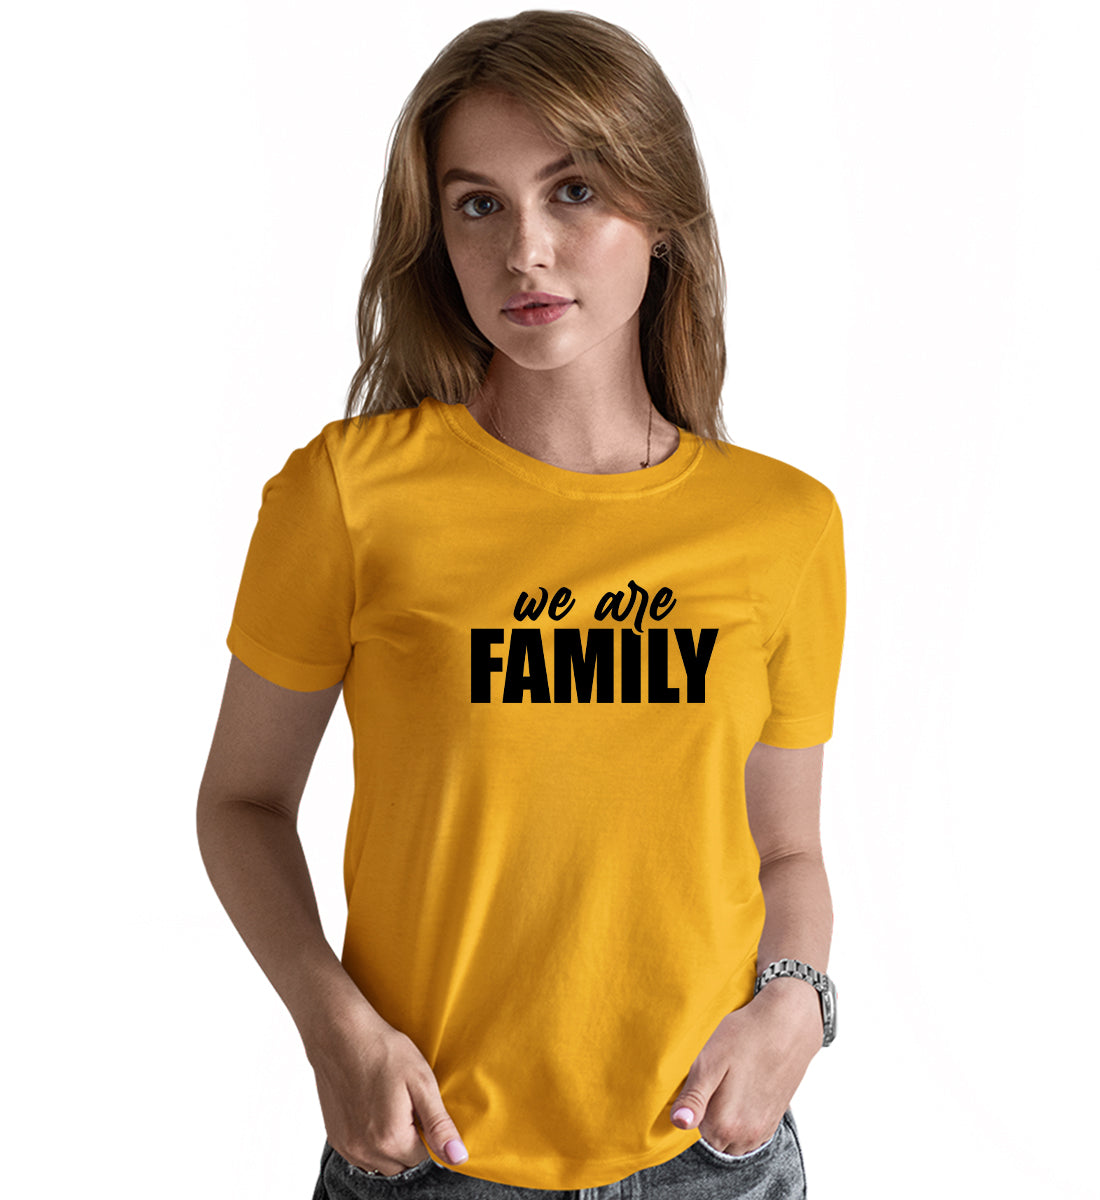 Family Matching Printed Tshirts (Pack Of 3)